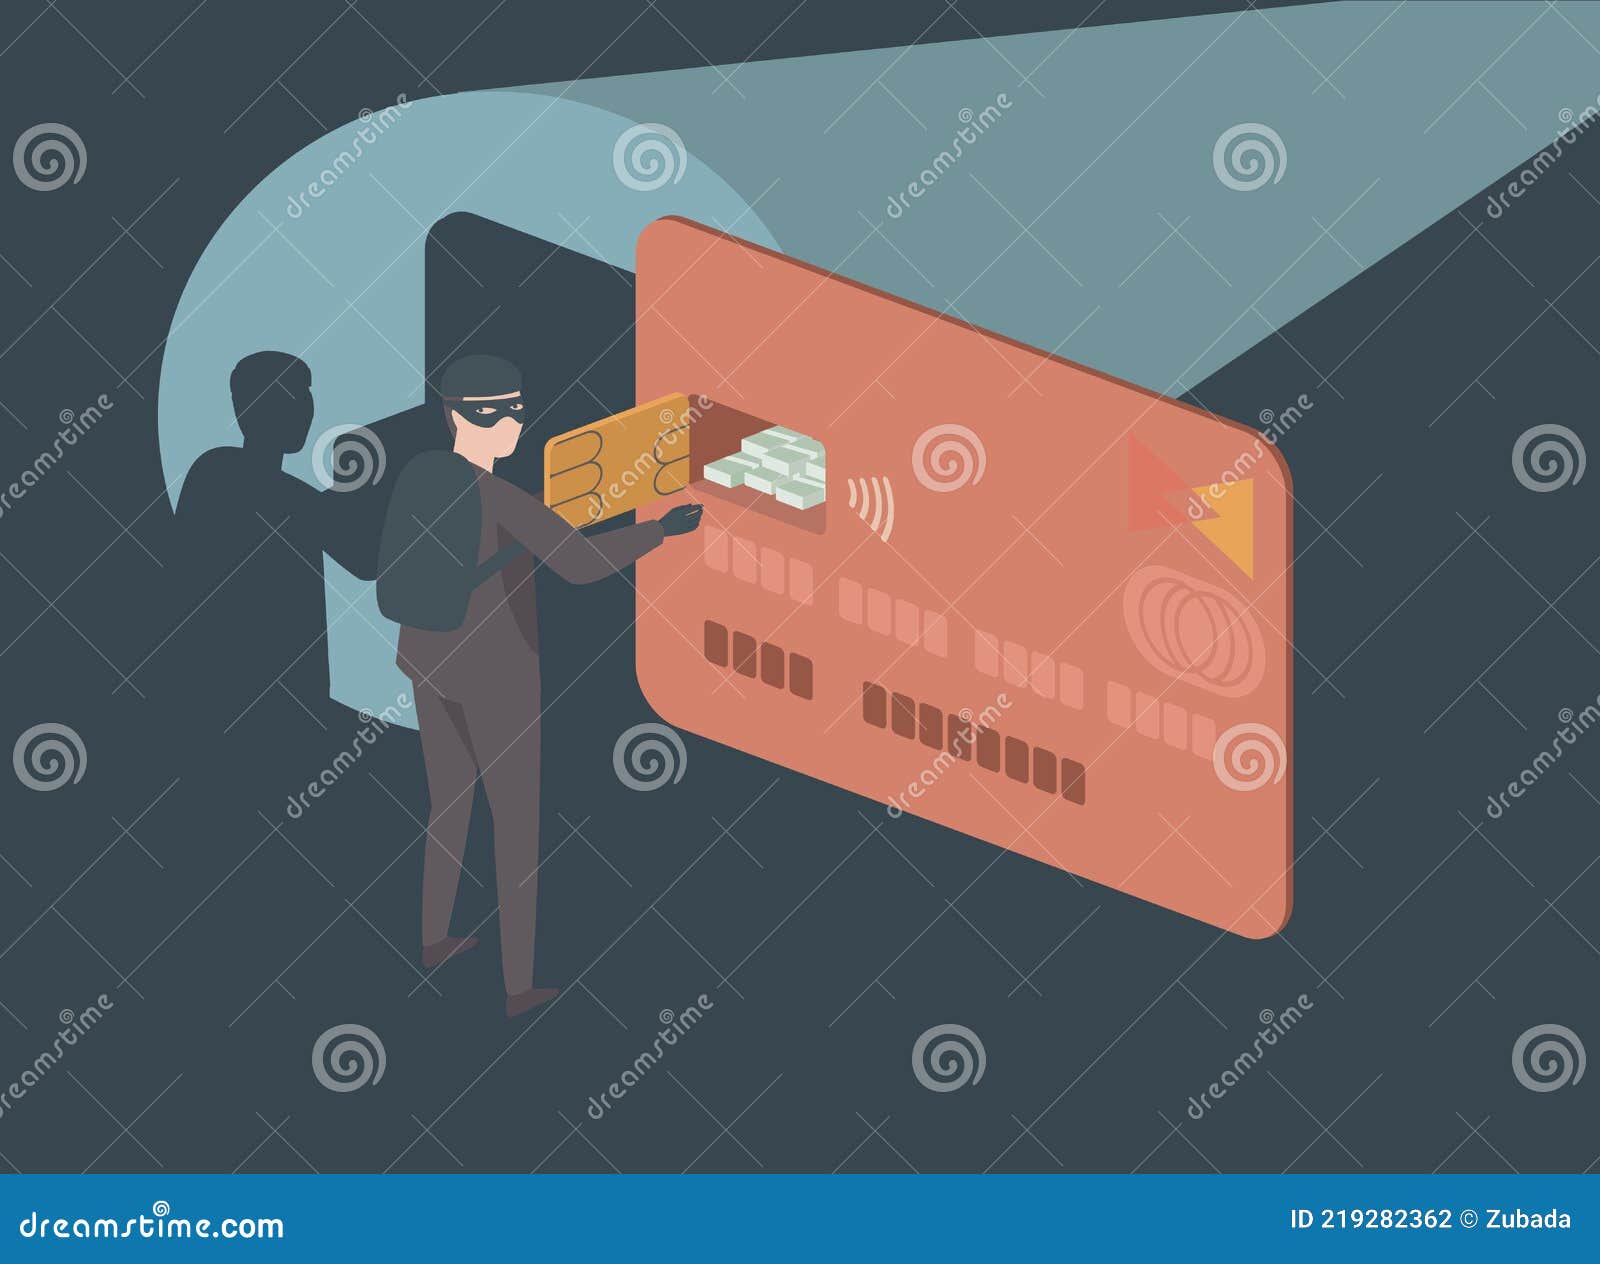 Hacker Trying To Steal Money From Bank Account Man Thief Hack Credit Card Security Concept Stock Vector Illustration Of Crime Confidential 219282362